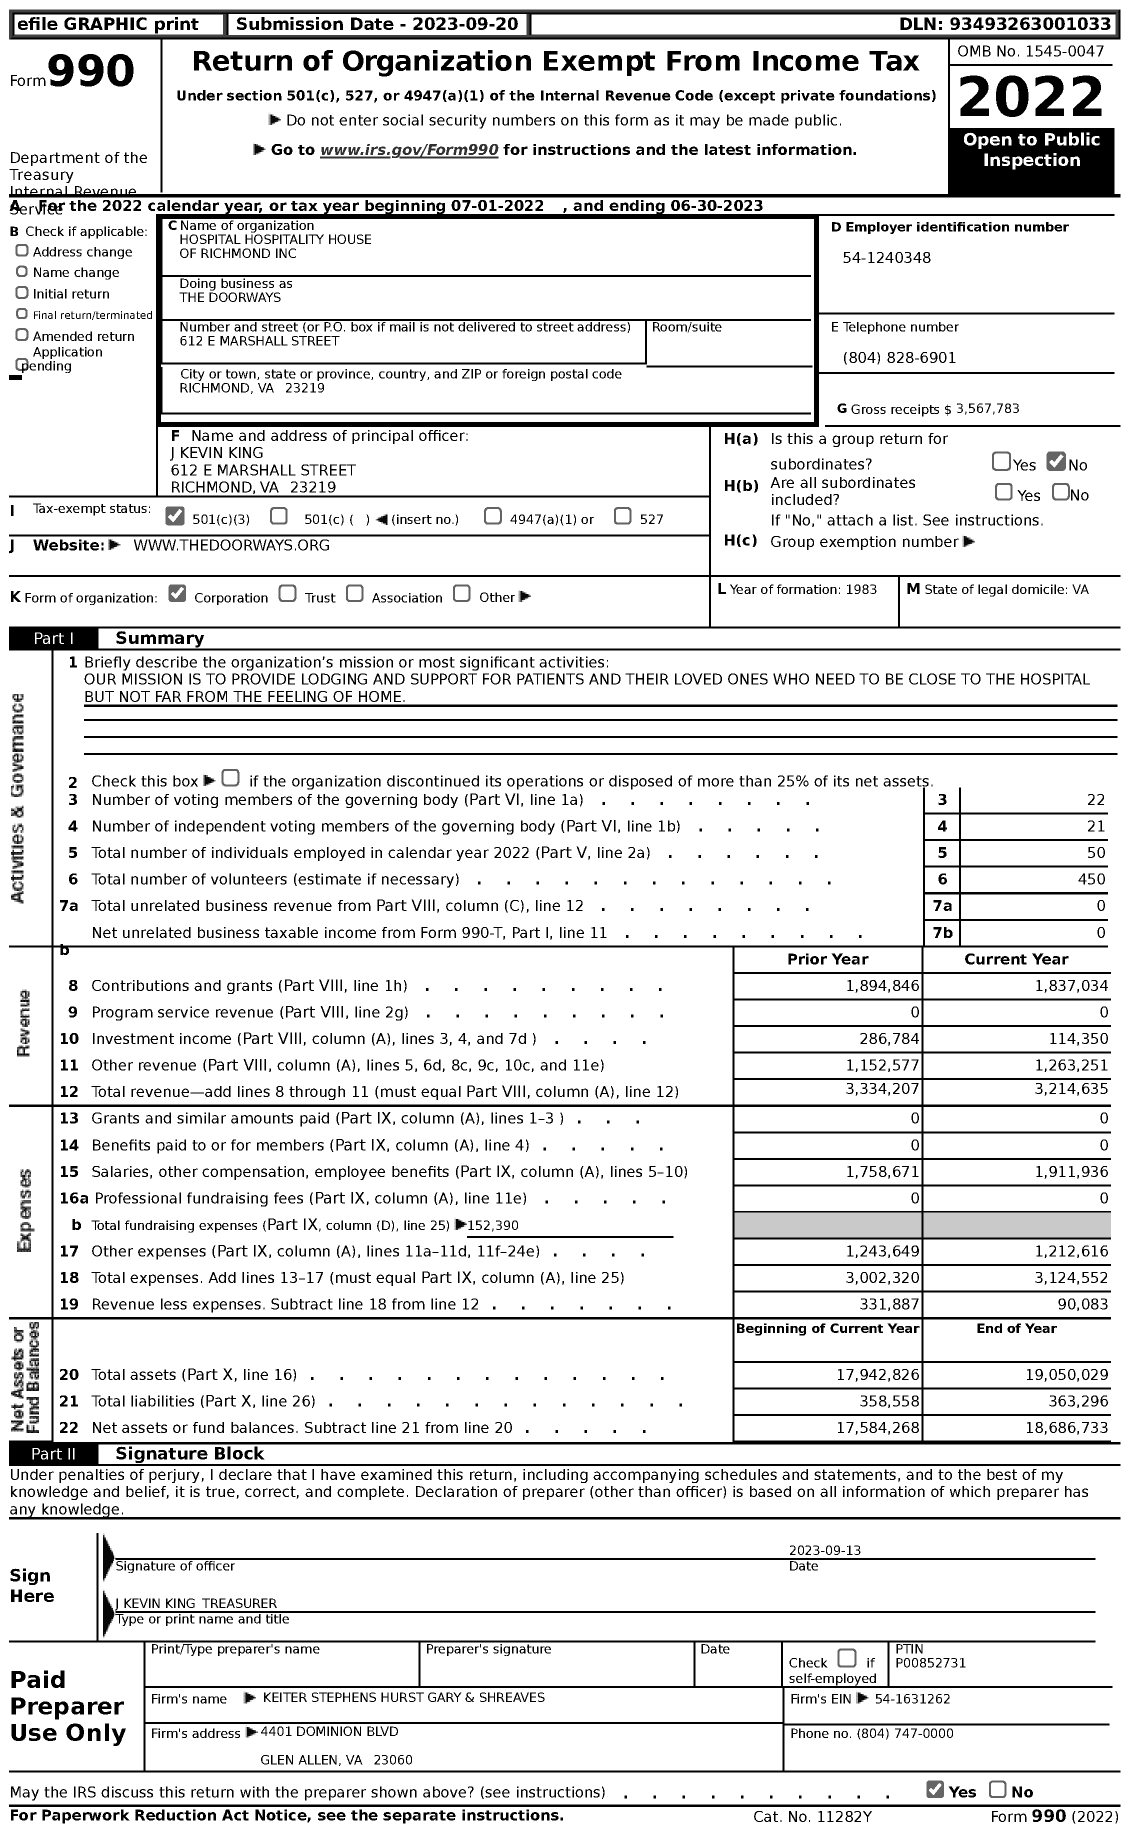 Image of first page of 2022 Form 990 for The Doorways